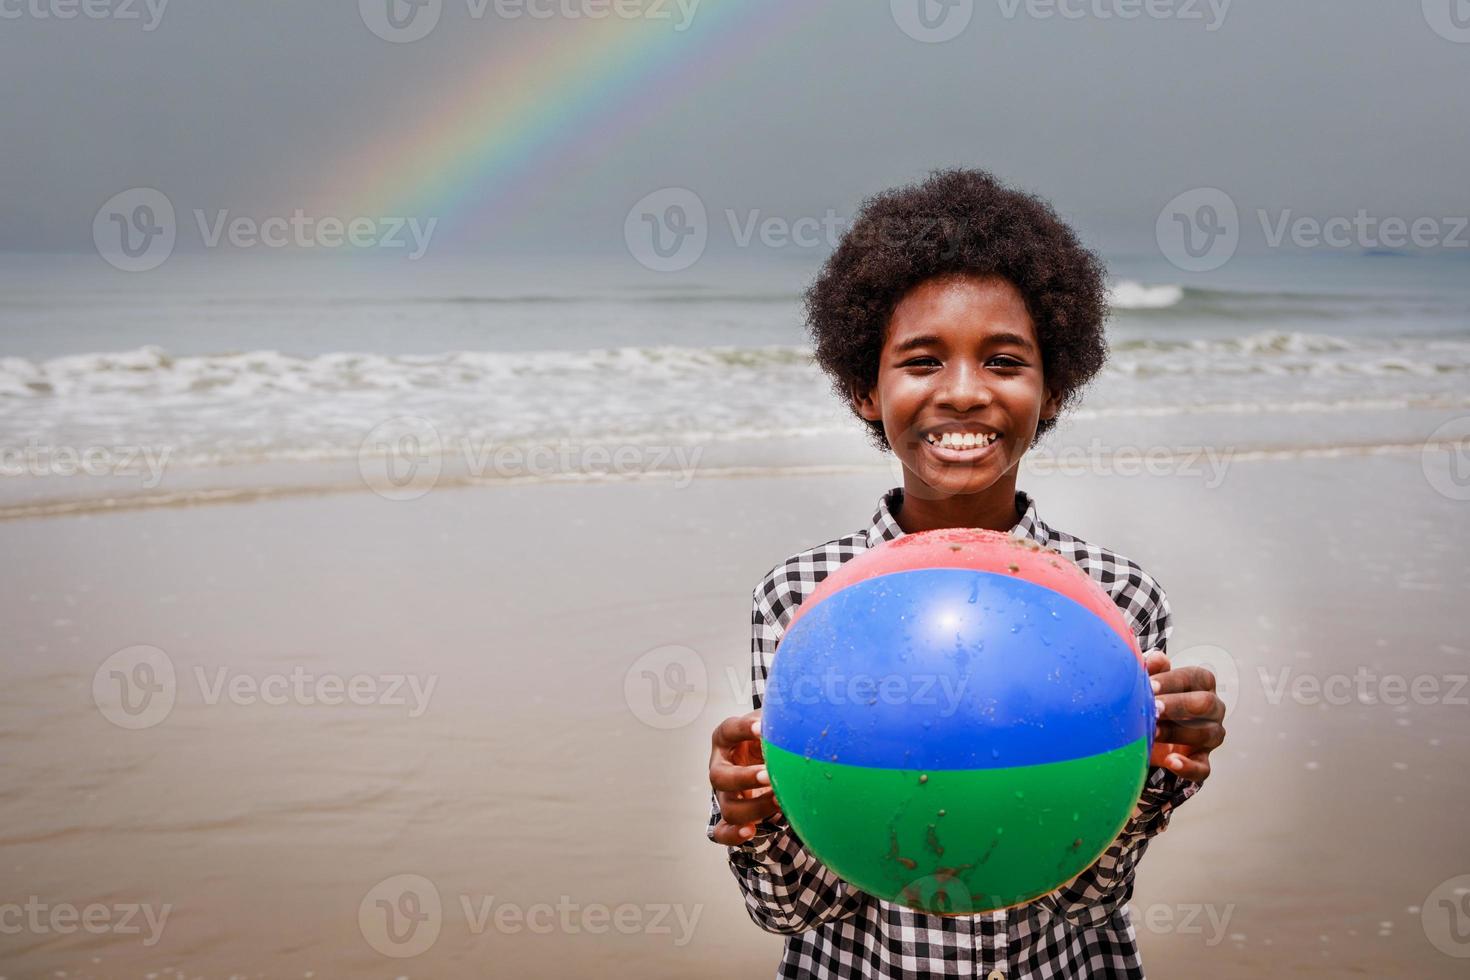 Portrait of Happy African American boy holding beach ball on a tropical beach. Ethnically diverse photo